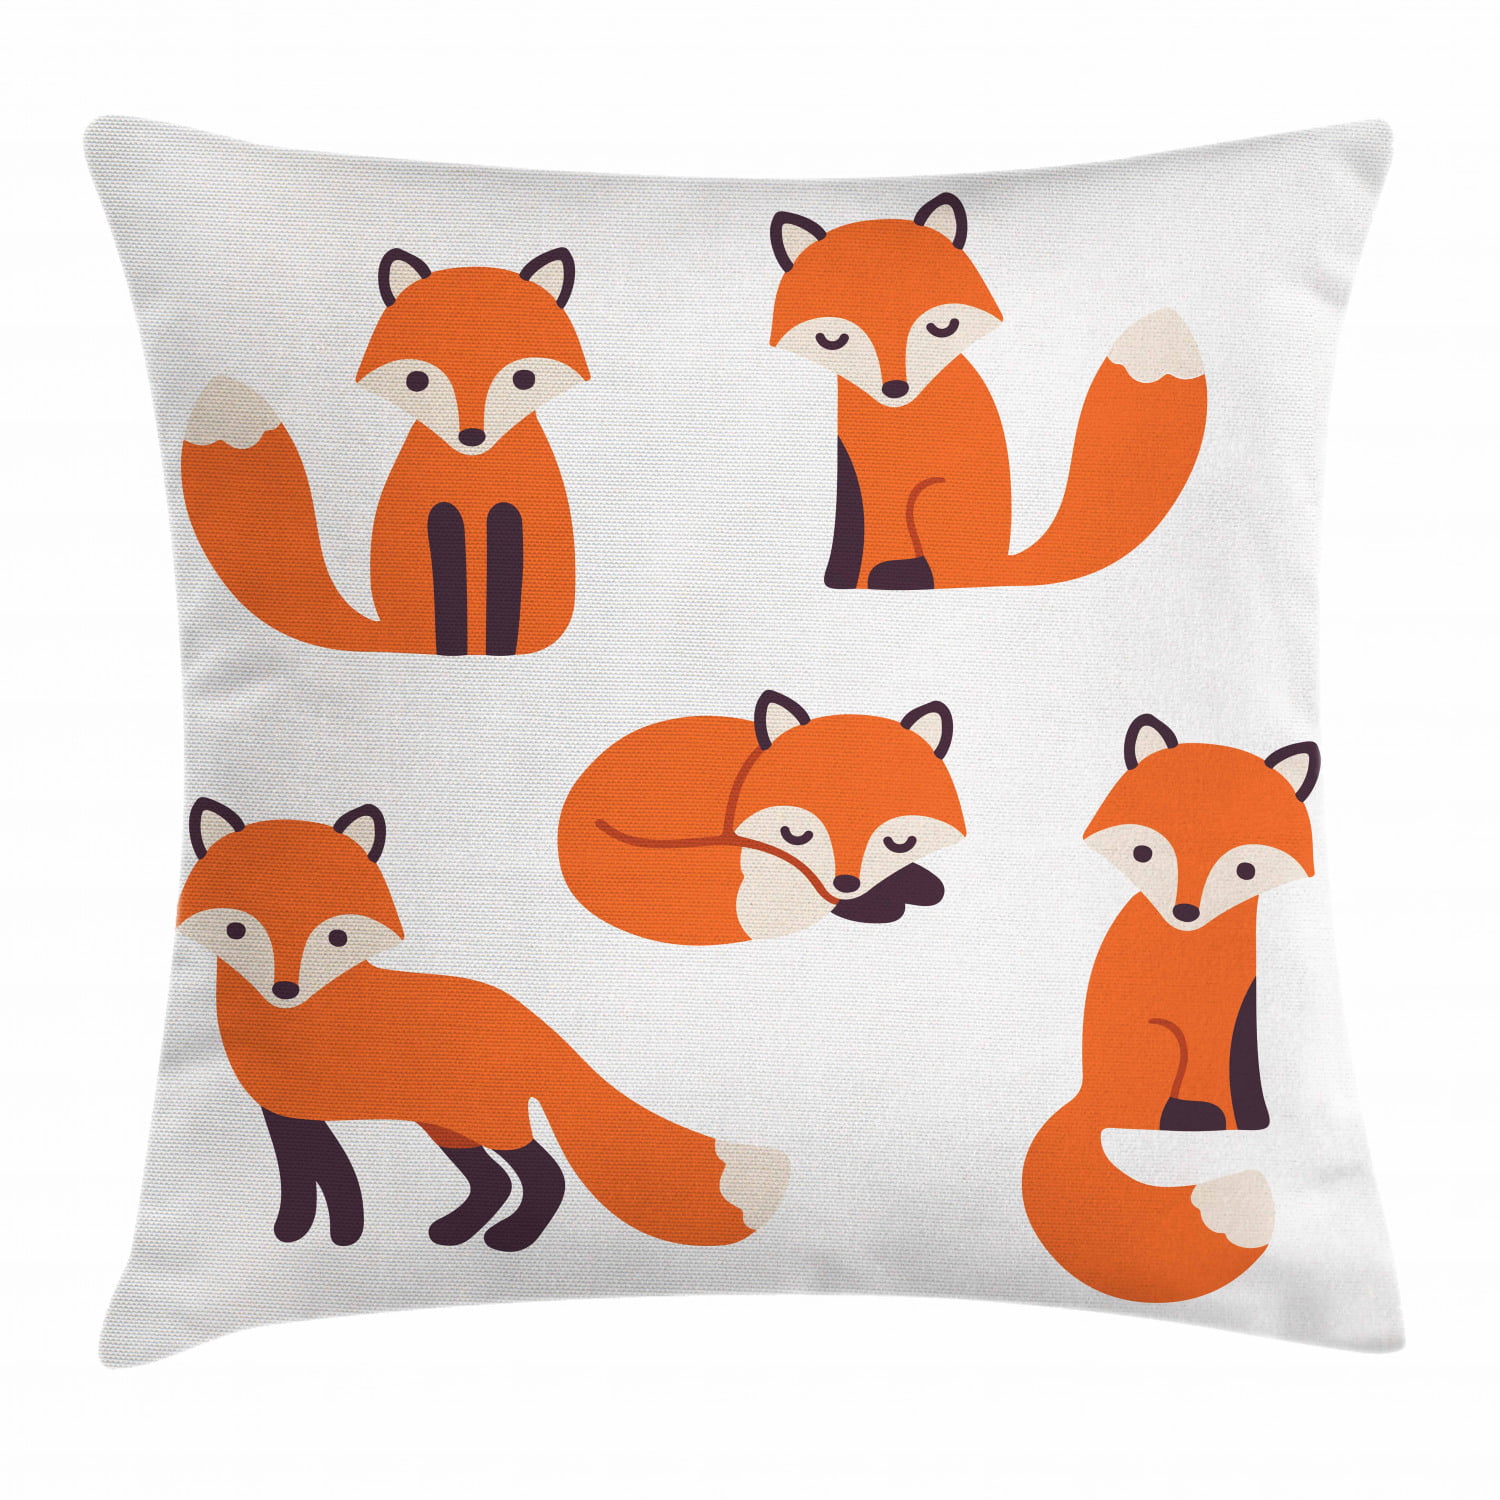 cartoon fox animal cushion cover decorative pillow cases covers US SELLER 